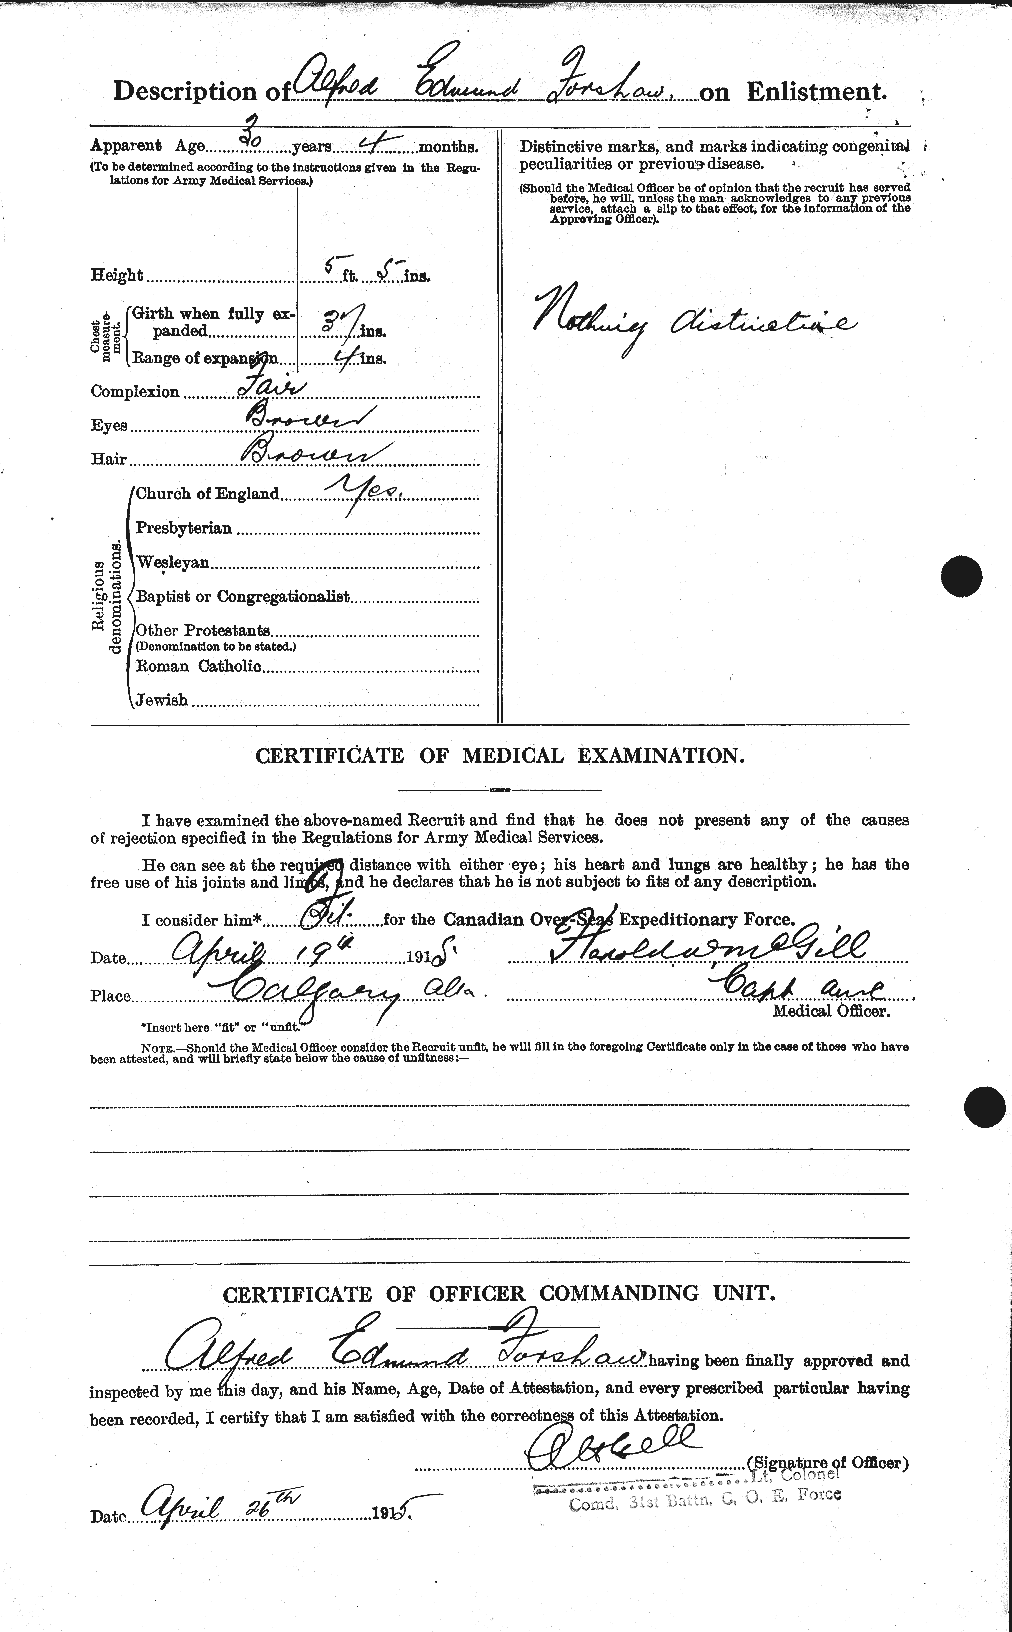 Personnel Records of the First World War - CEF 329660b